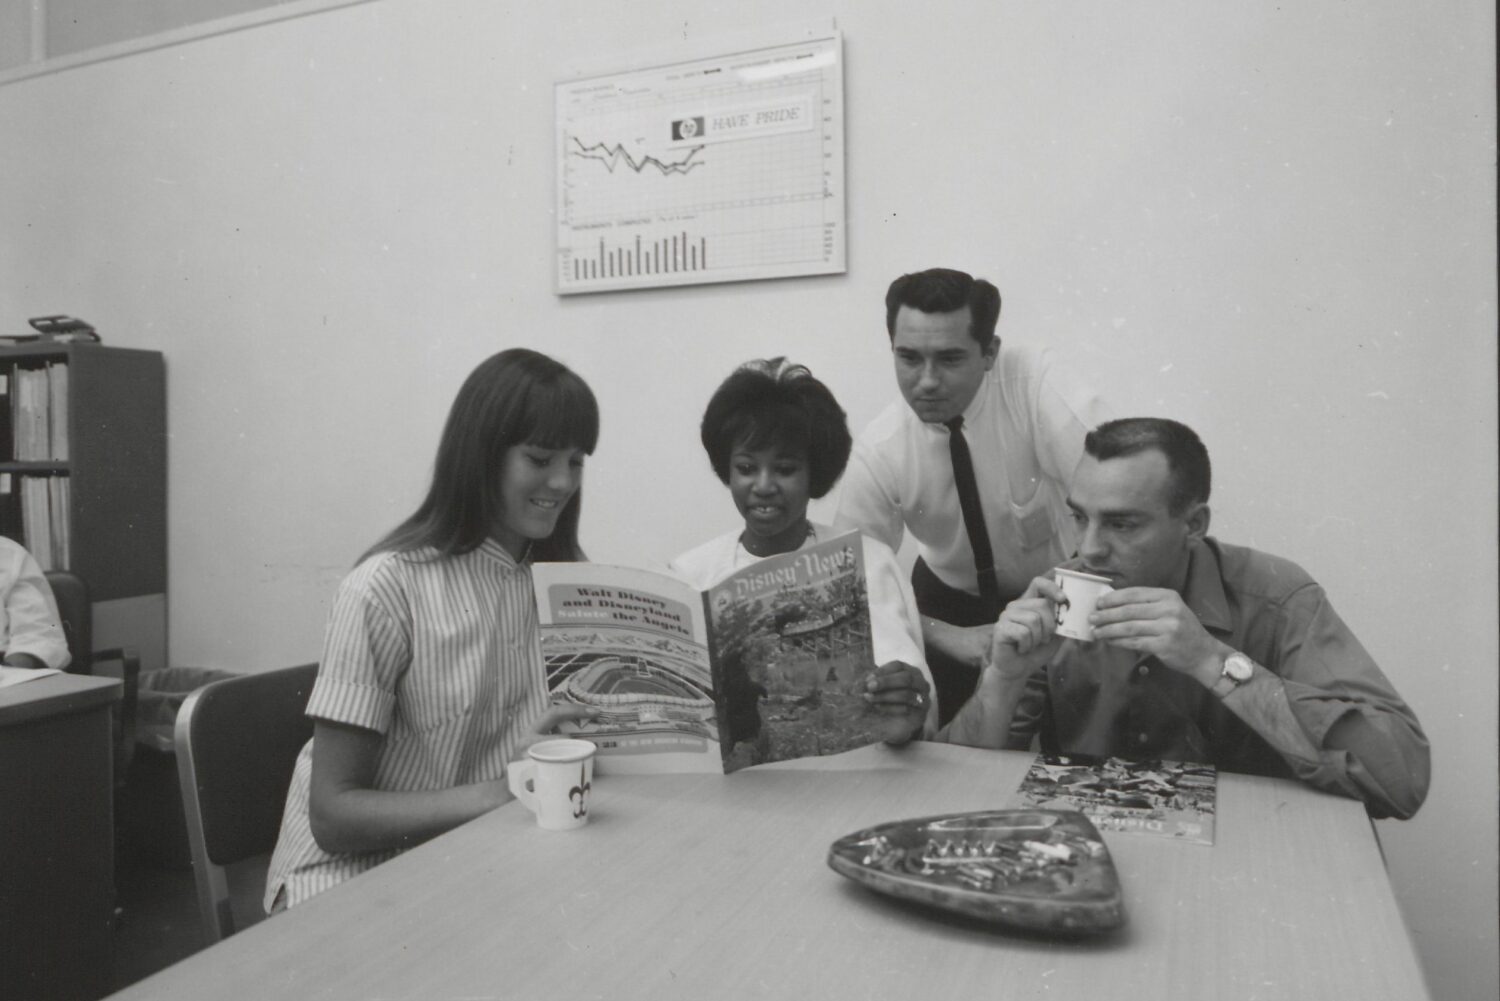 Photo of Moseley Division employees in the HP breakroom in 1958.